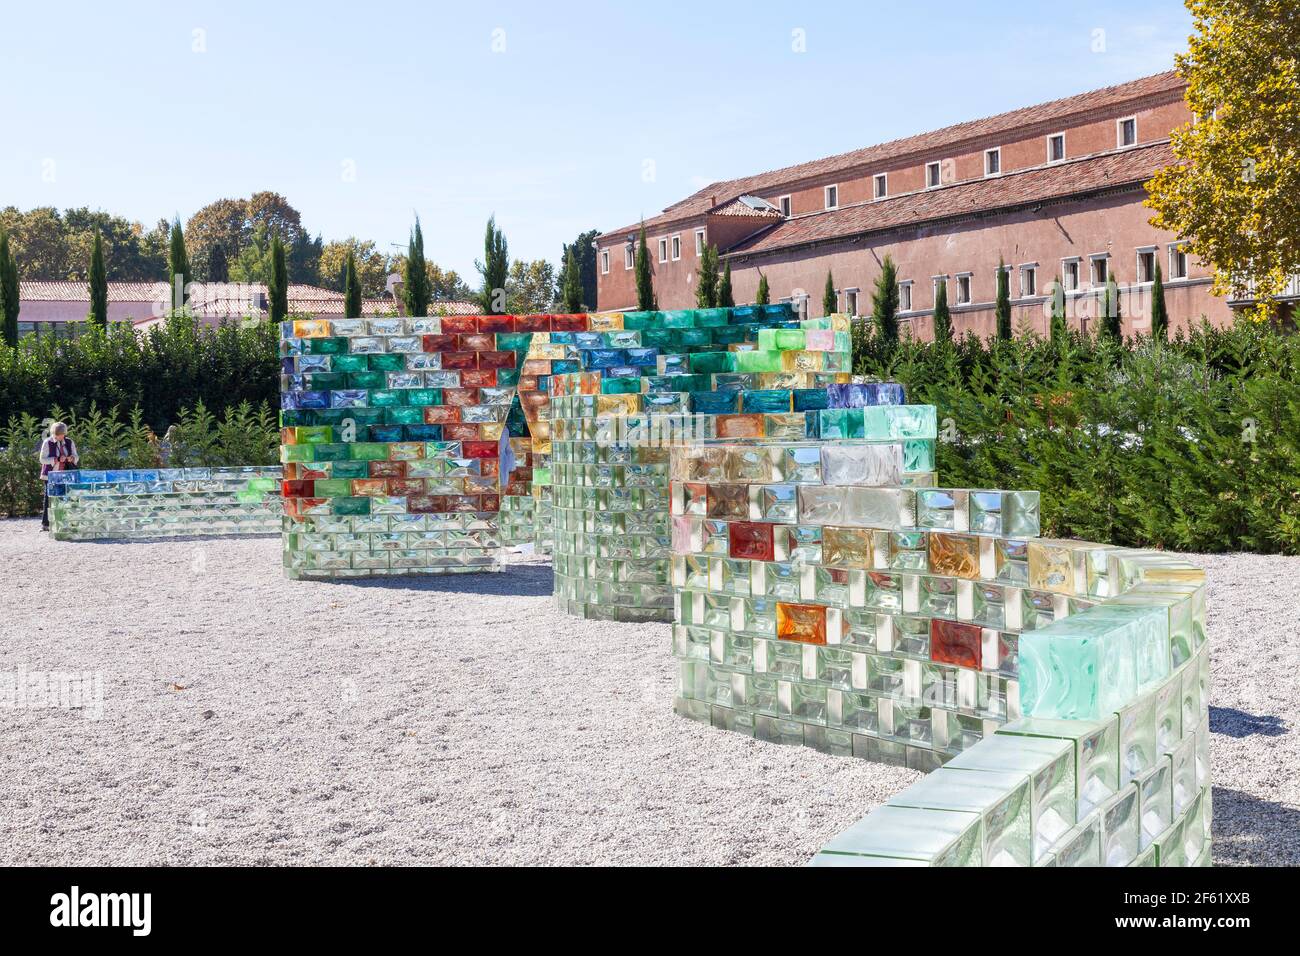 Woman photographing the glass  wall exhibit Qwalala by Pae White in Venice, Italy  on San Giorgio Maggiore Island during the 2017 Art Biennale Stock Photo